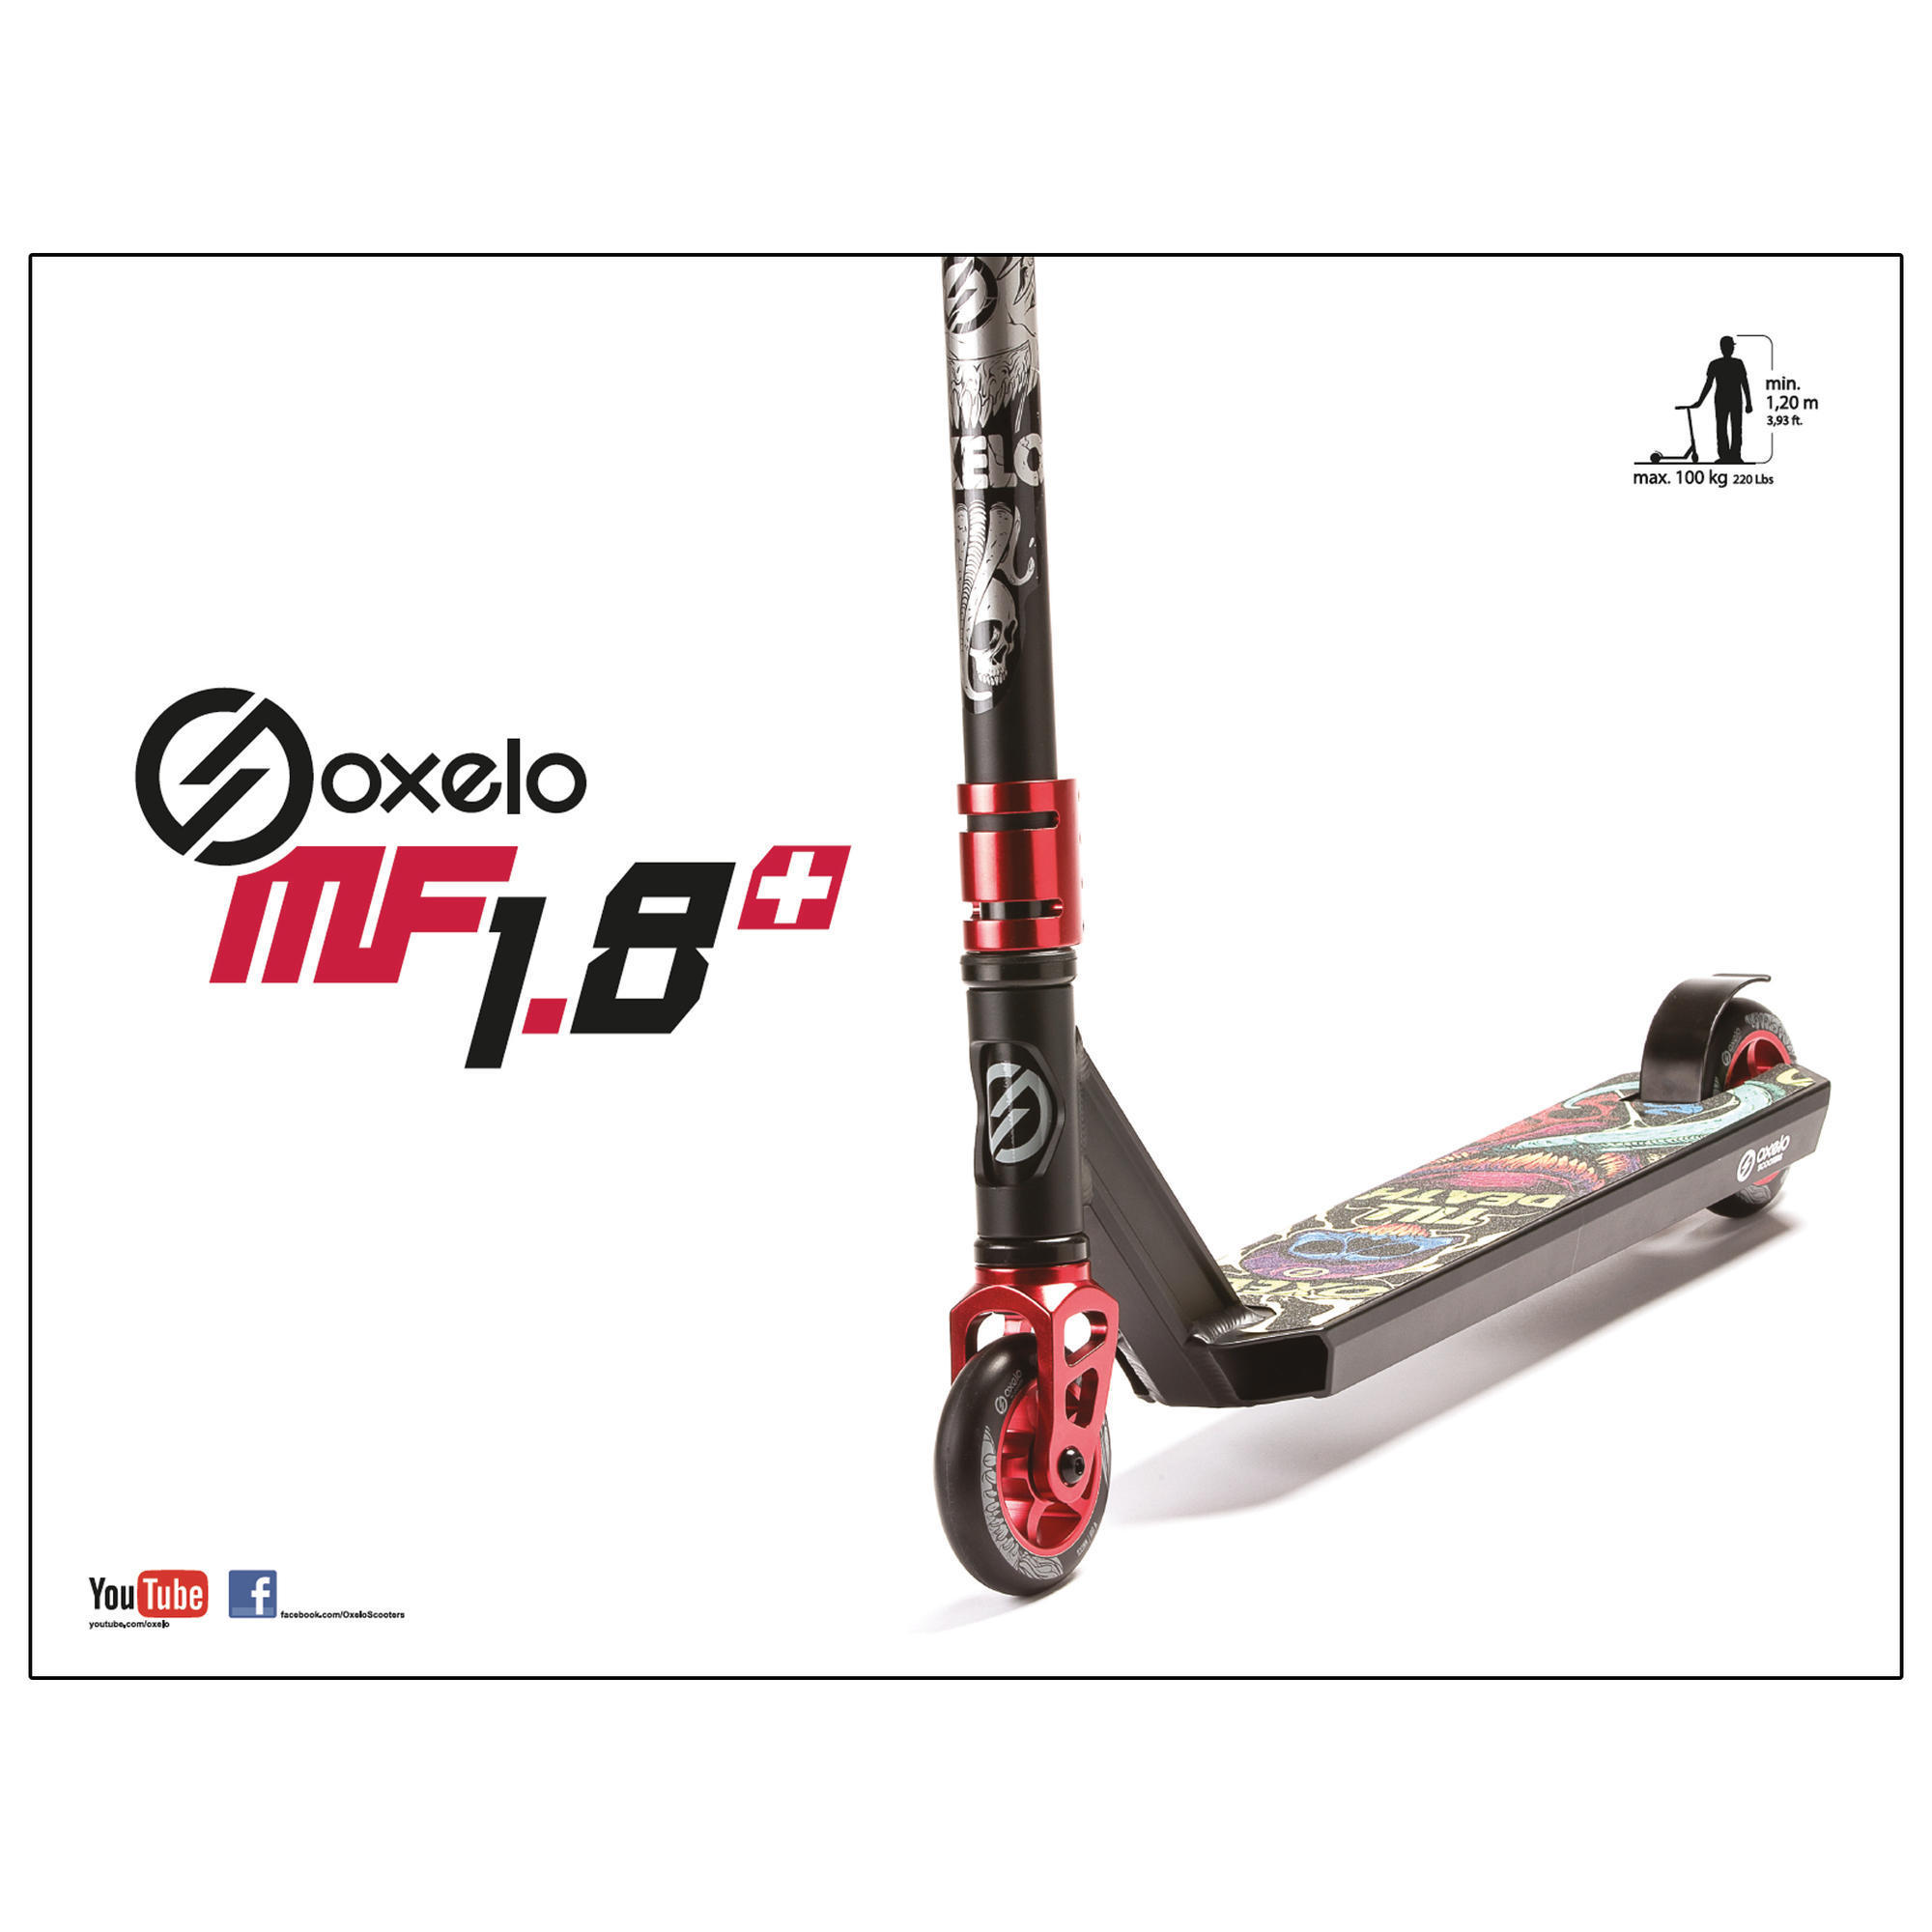 scooter mf1 8